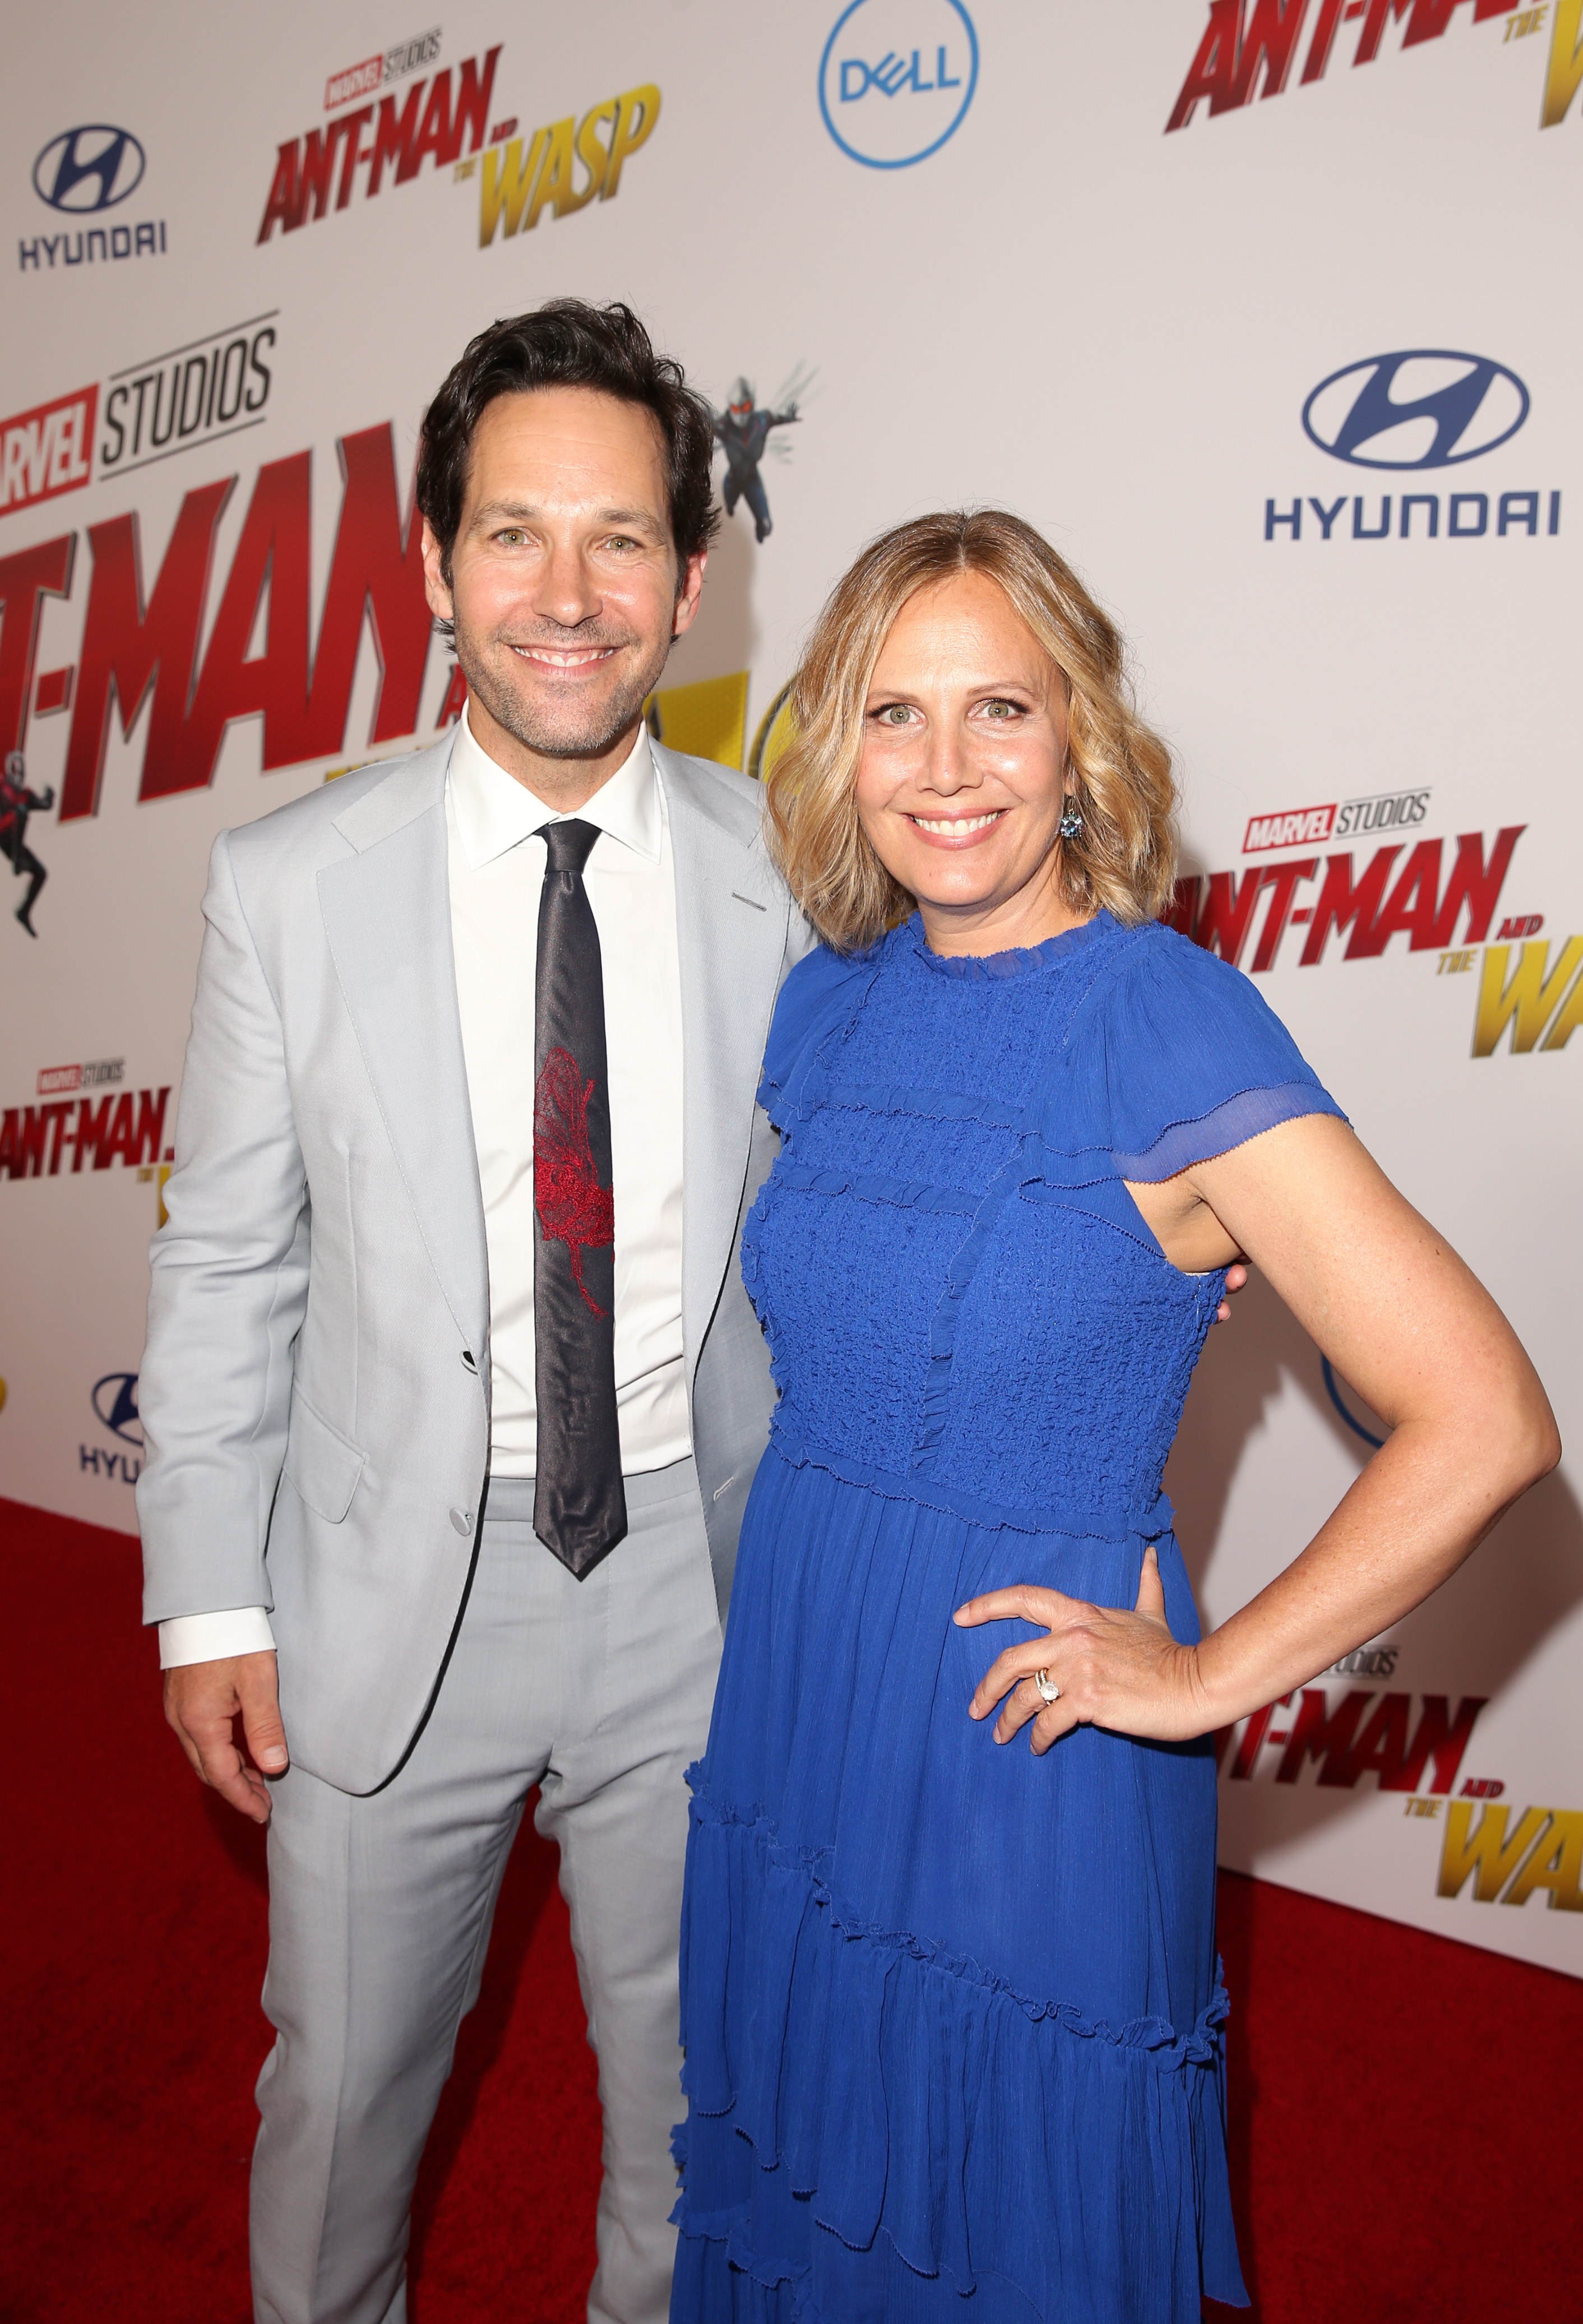 at the antman premiere